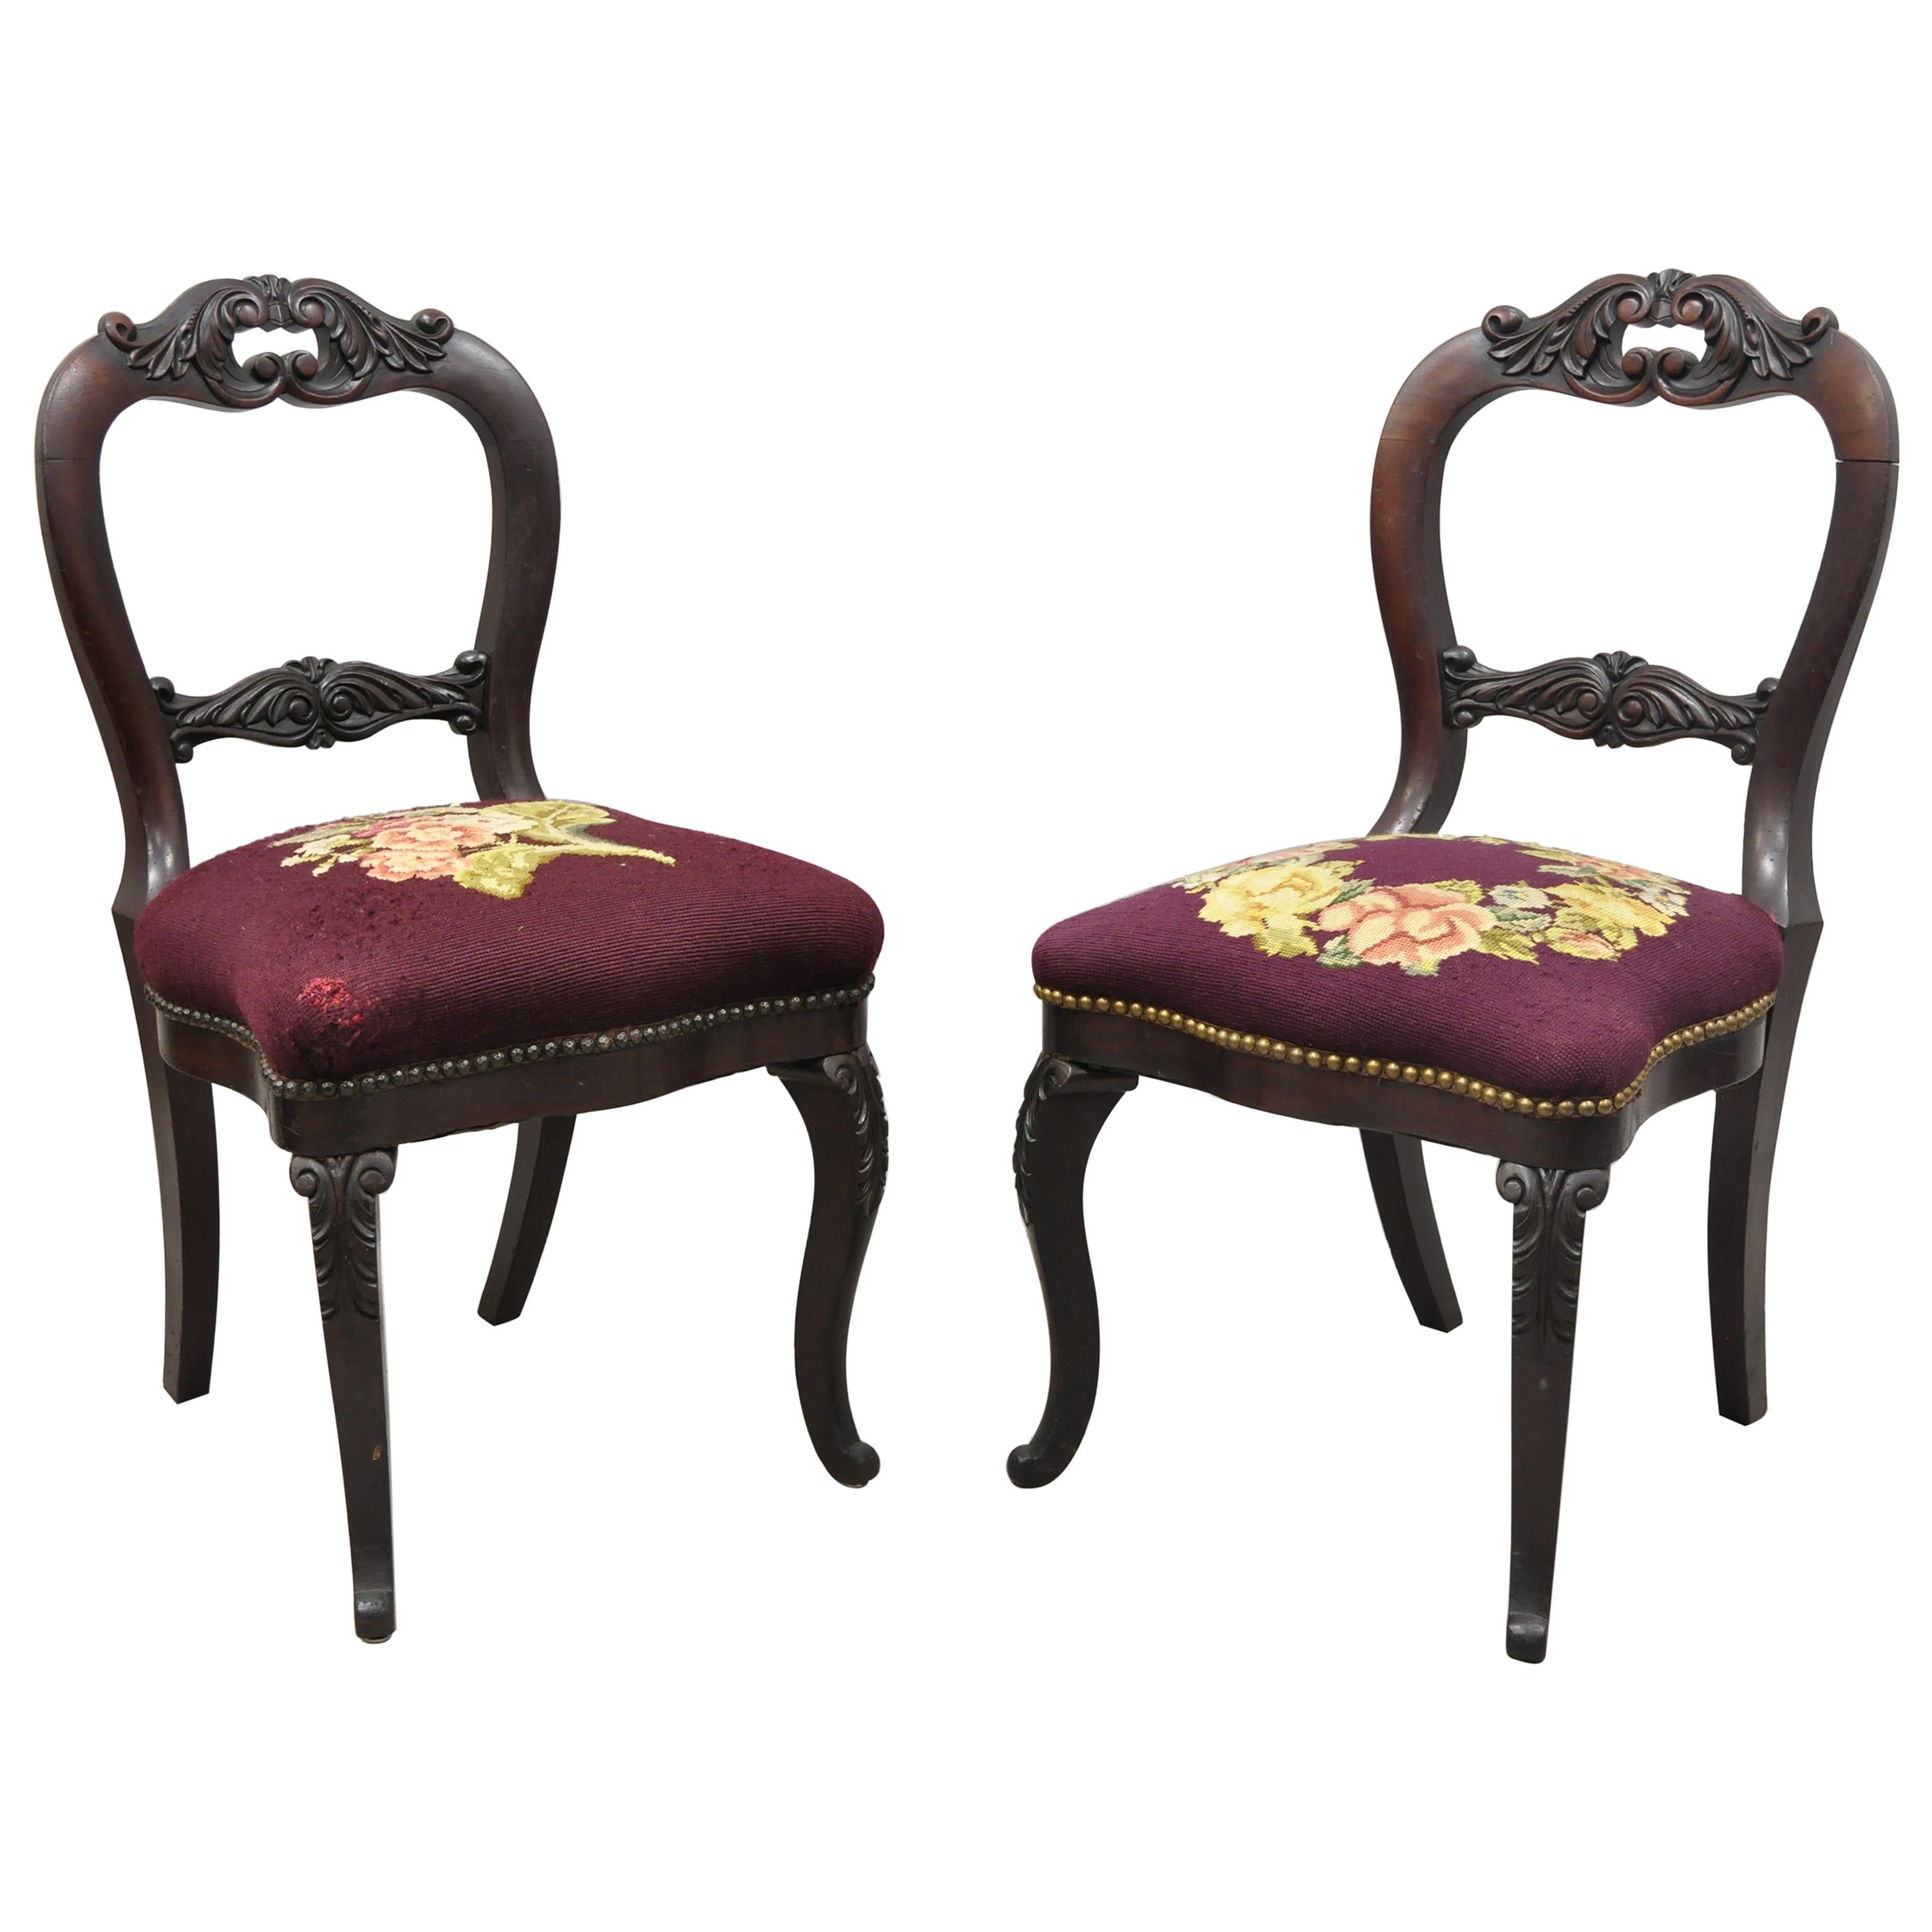 American Eastlake Victorian Carved Mahogany Needlepoint Side Chairs, a Pair For Sale